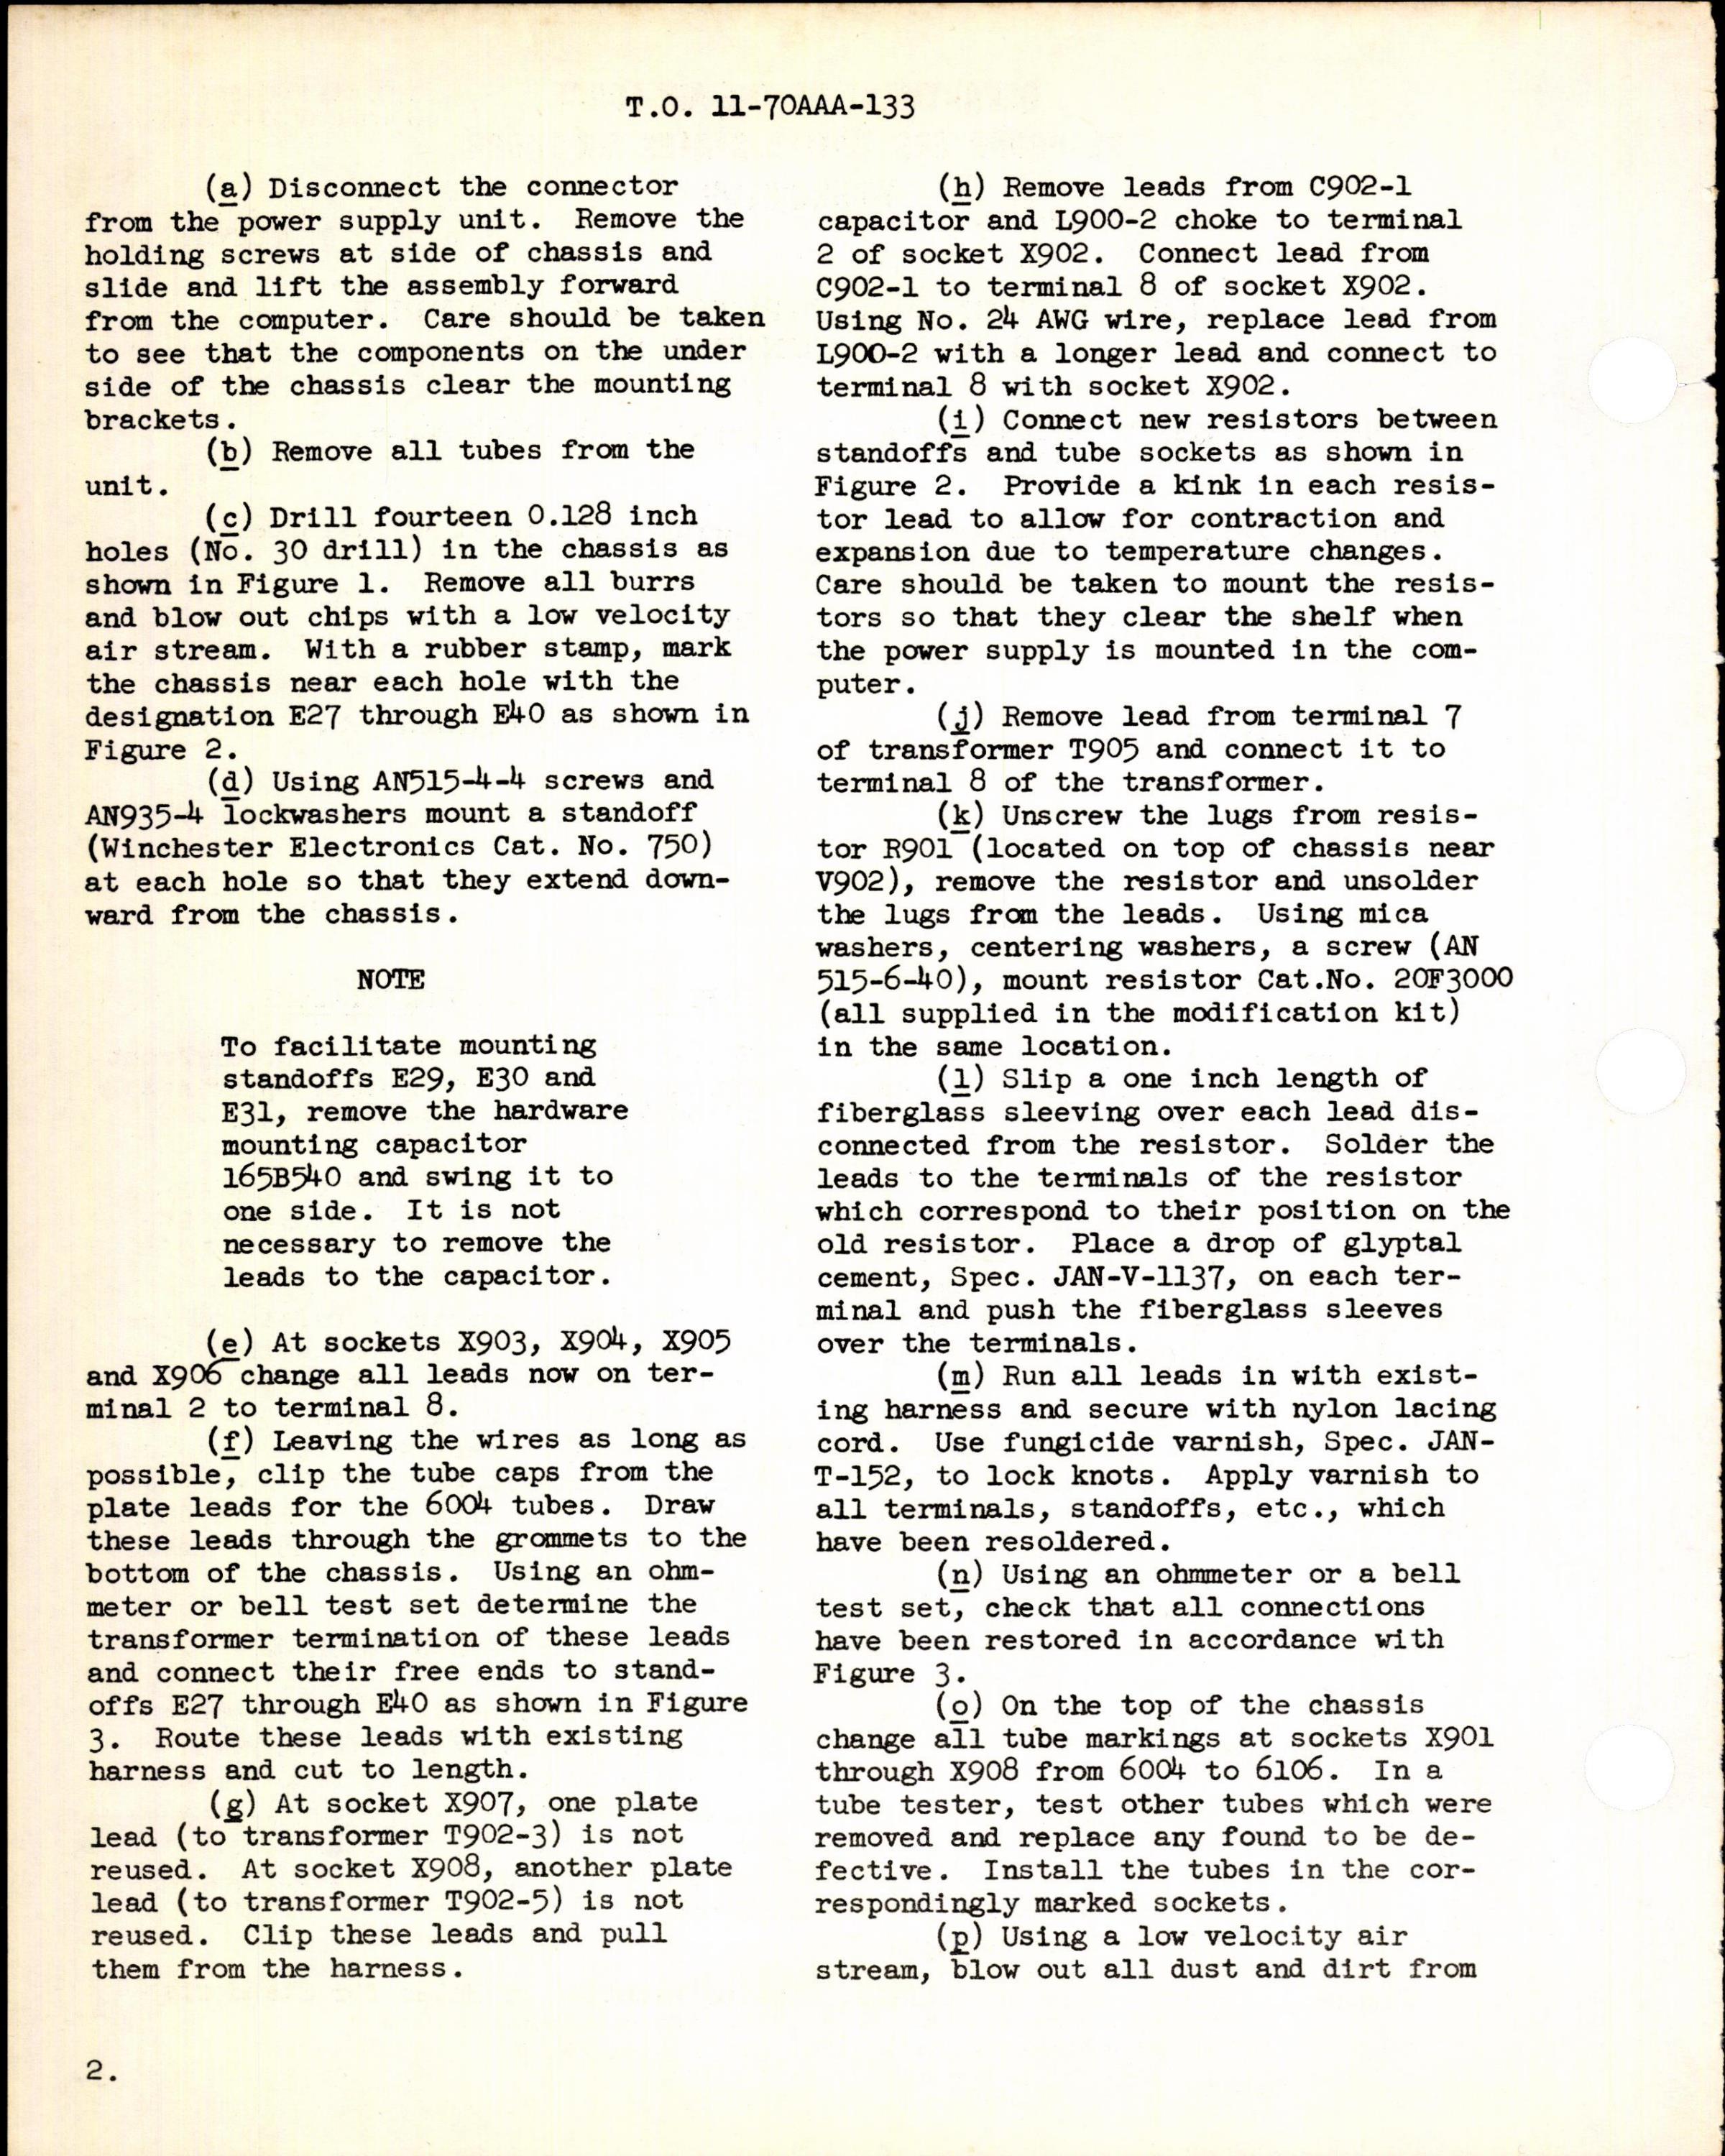 Sample page 2 from AirCorps Library document: Modification of Computer Power Supply for B-36 Fire Control System